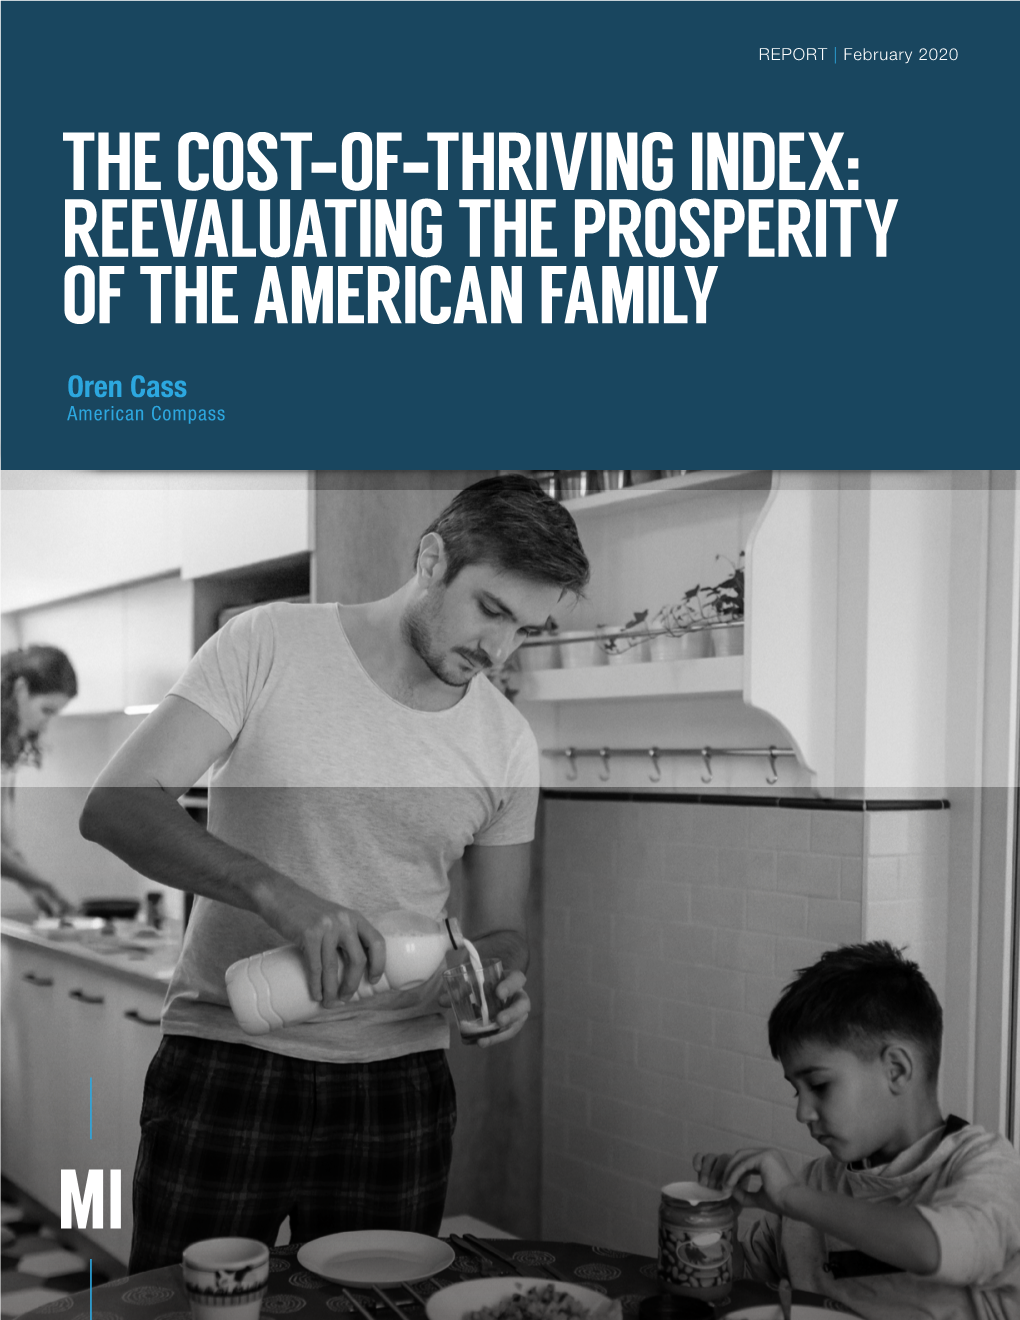 The Cost-Of-Thriving Index: Reevaluating the Prosperity of the American Family